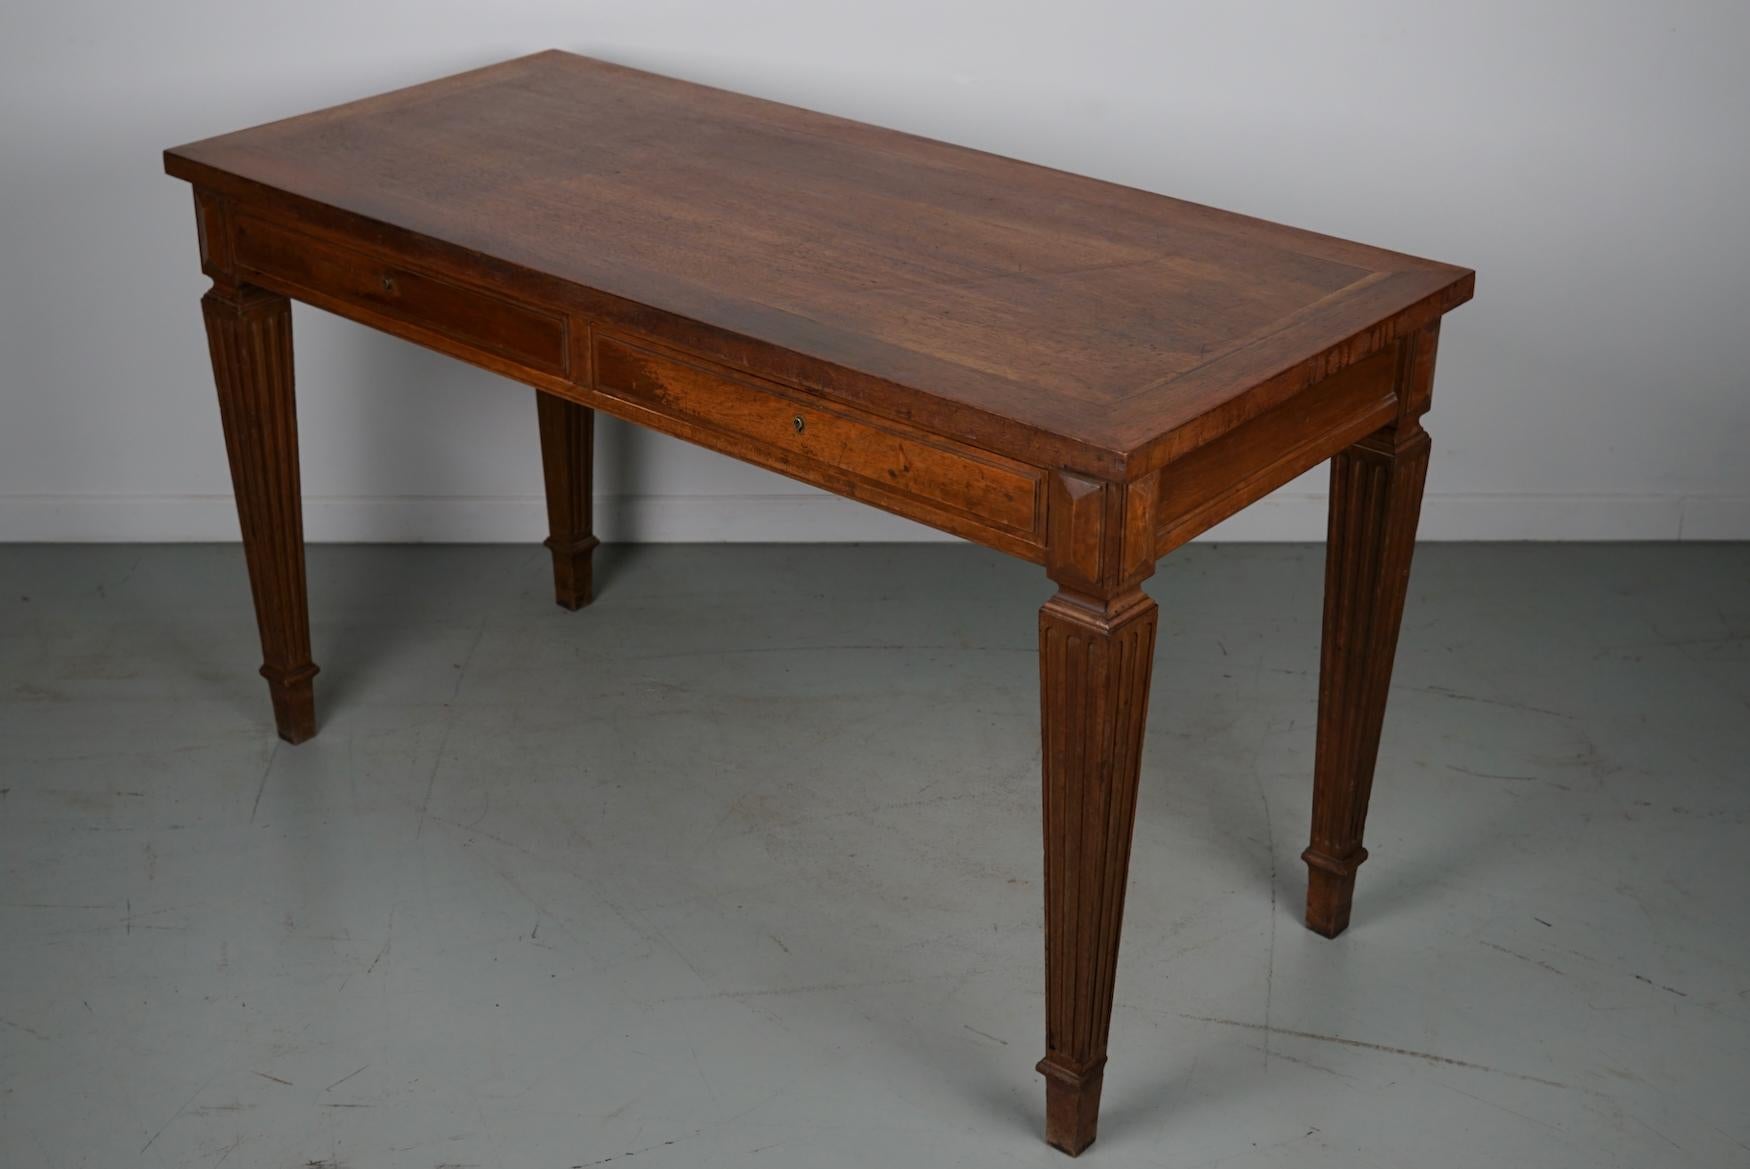 This writing table was designed and made in France from walnut wood around the 1920s. It features two drawers and has nice details on the legs.